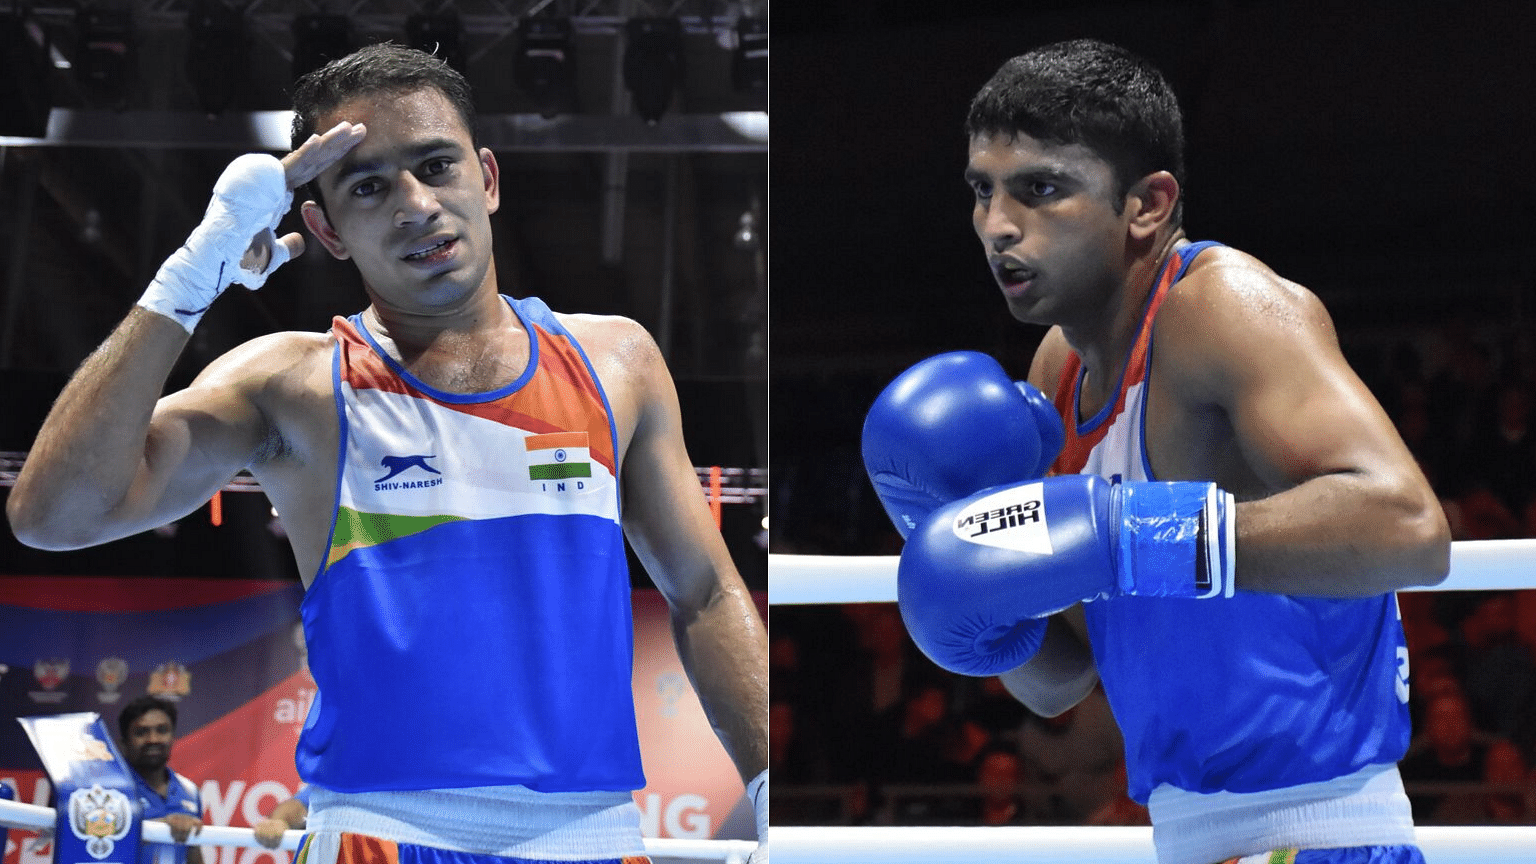 India’s Amit Panghal and Manish Kaushik will be fighting in their semifinal bouts of the World Boxing Championships.